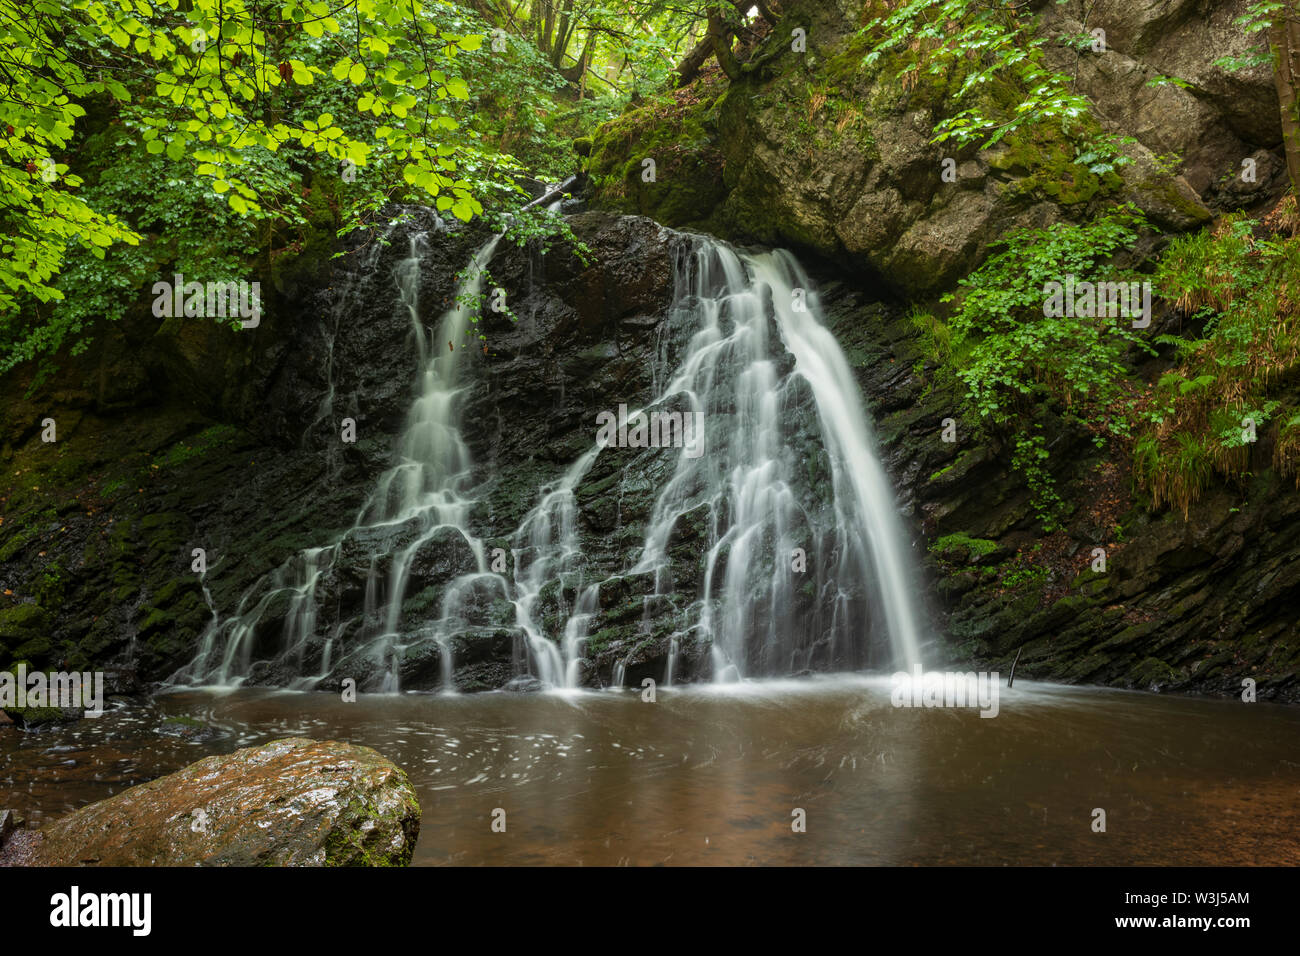 The falls at  Fairy Glen, a hidden jewel found after a 30-minute hike near the town of Rosemarkie, Scotland on the Black Isle Peninsula. Stock Photo